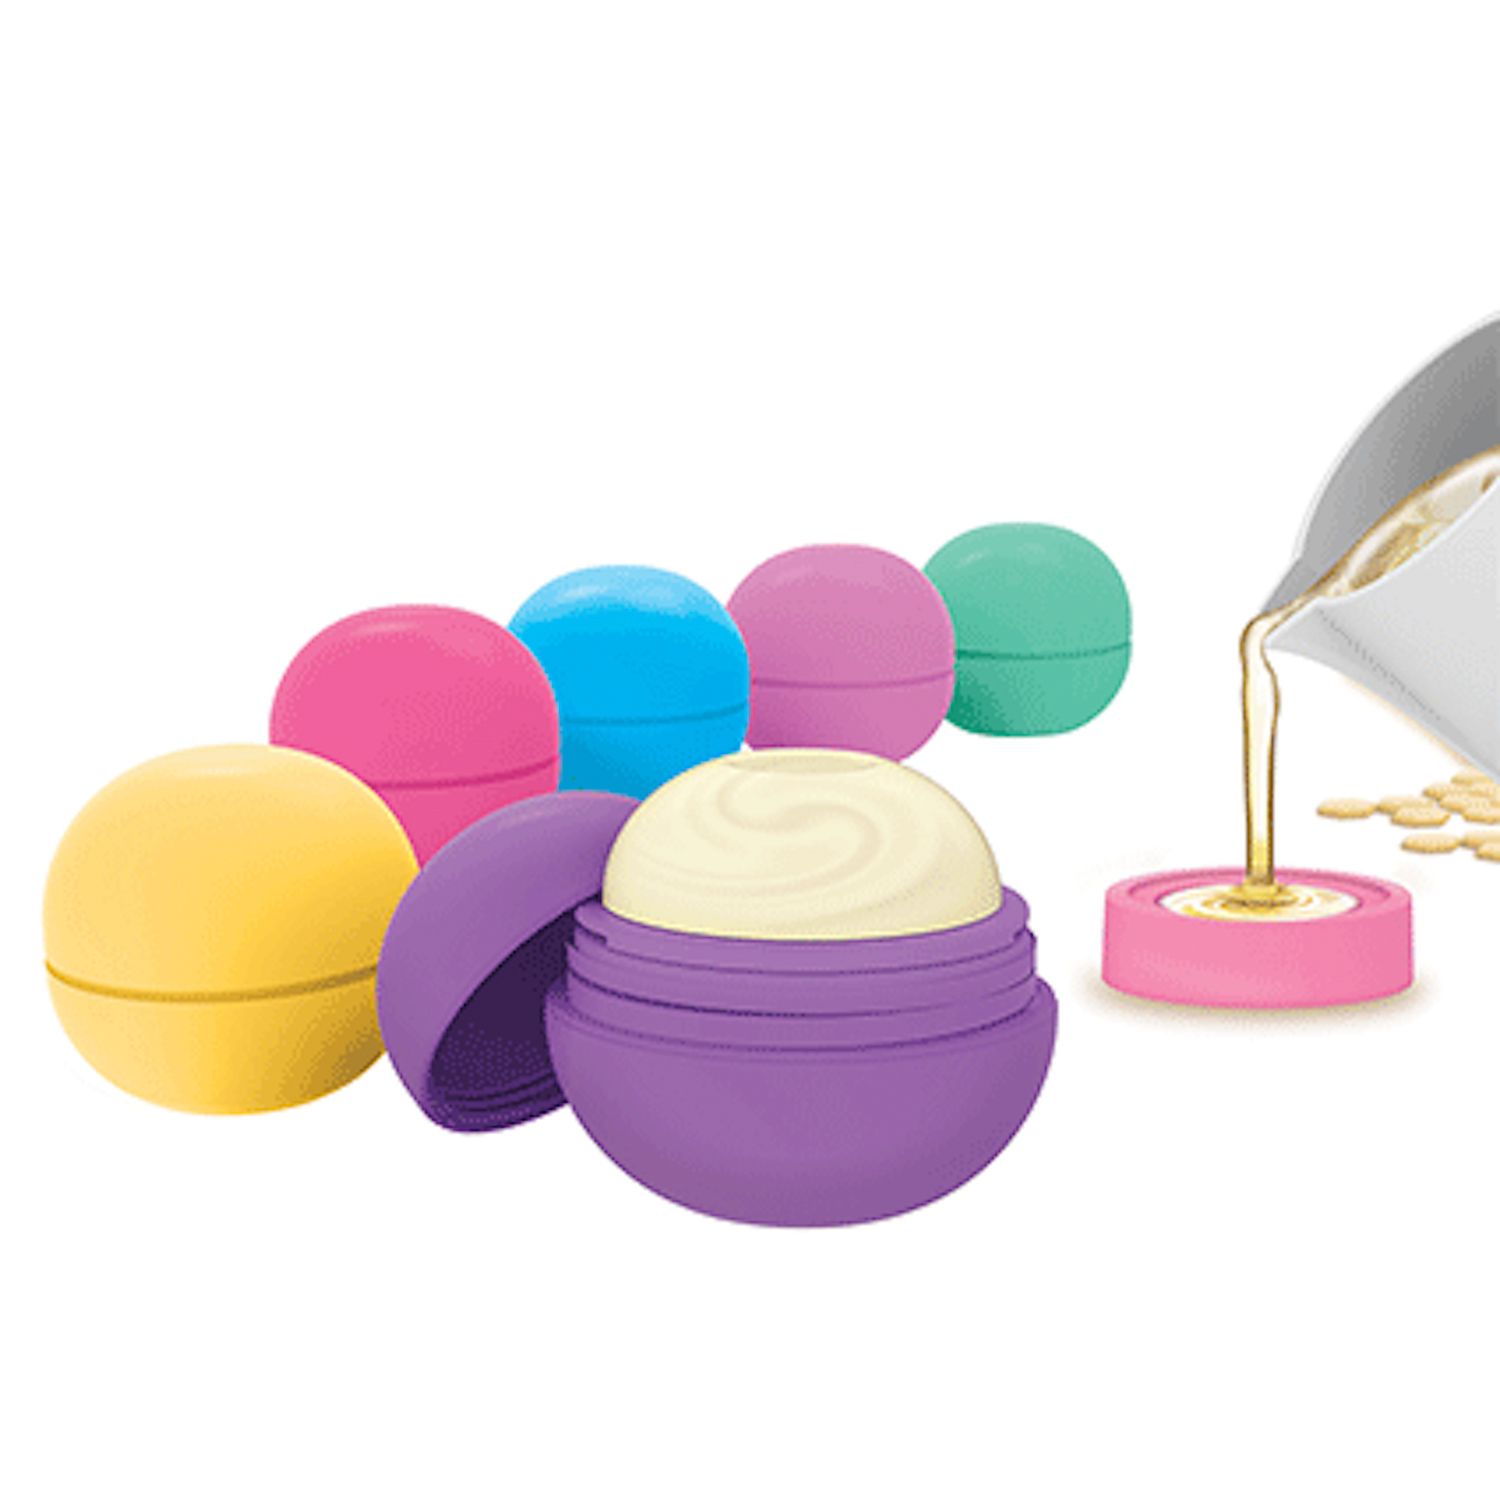 all natural lip balm boutique by smartlab toys